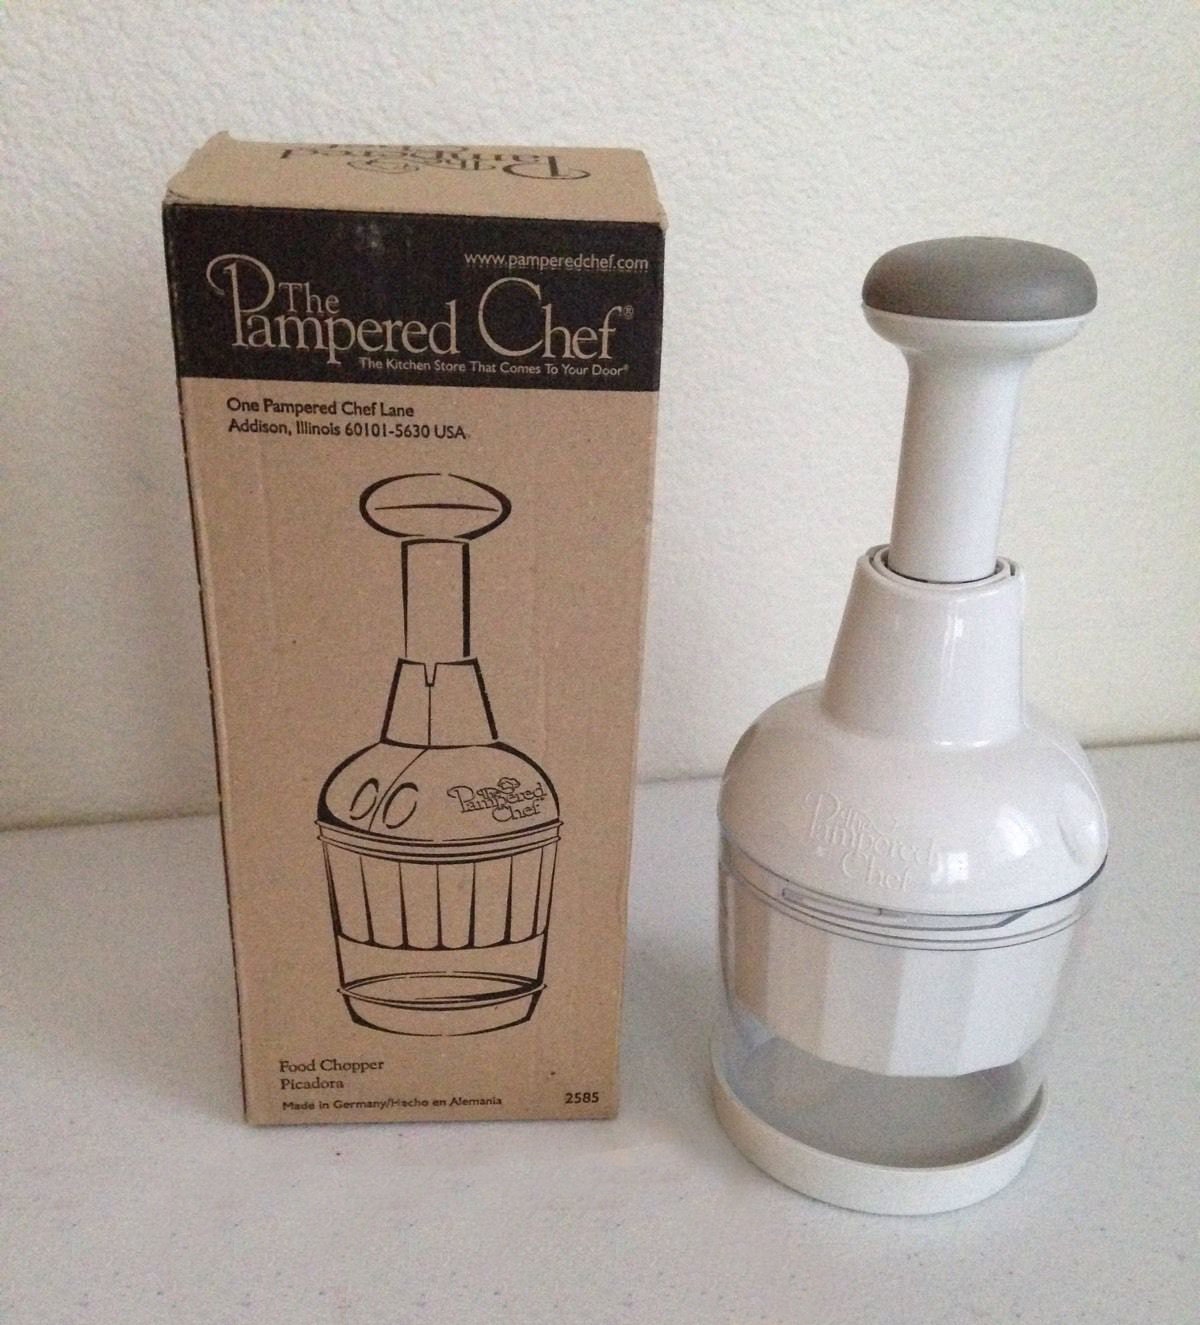 pampered chef chopper instructions